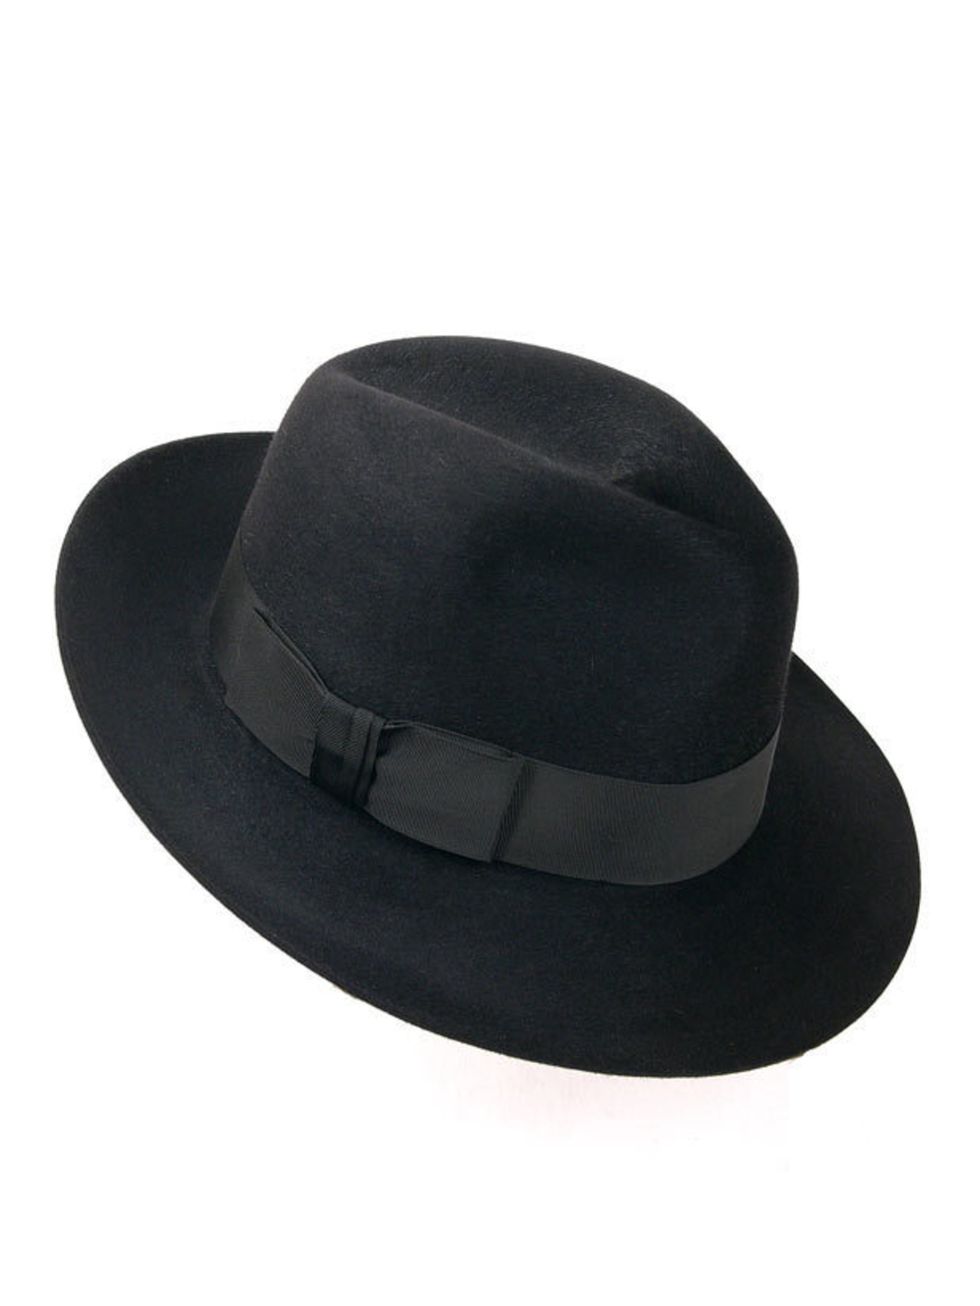 <p><a href="http://christys-hats.com/fedora-new.htm">Christy's</a> fedora hat, £69</p>